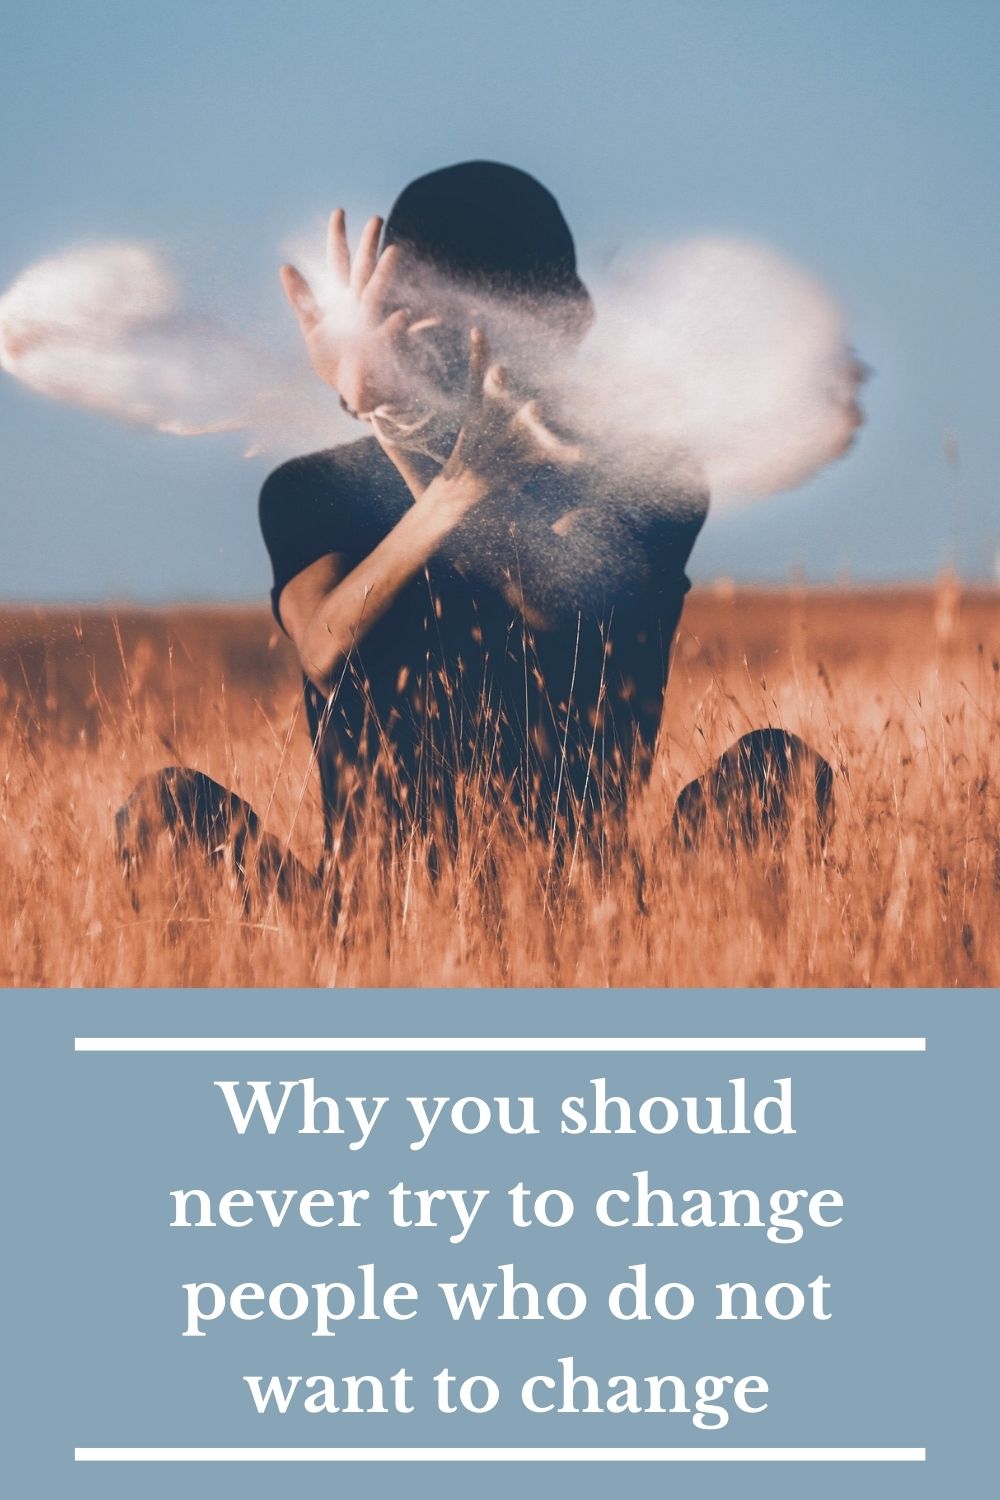 Why you should never try to change people who do not want to change